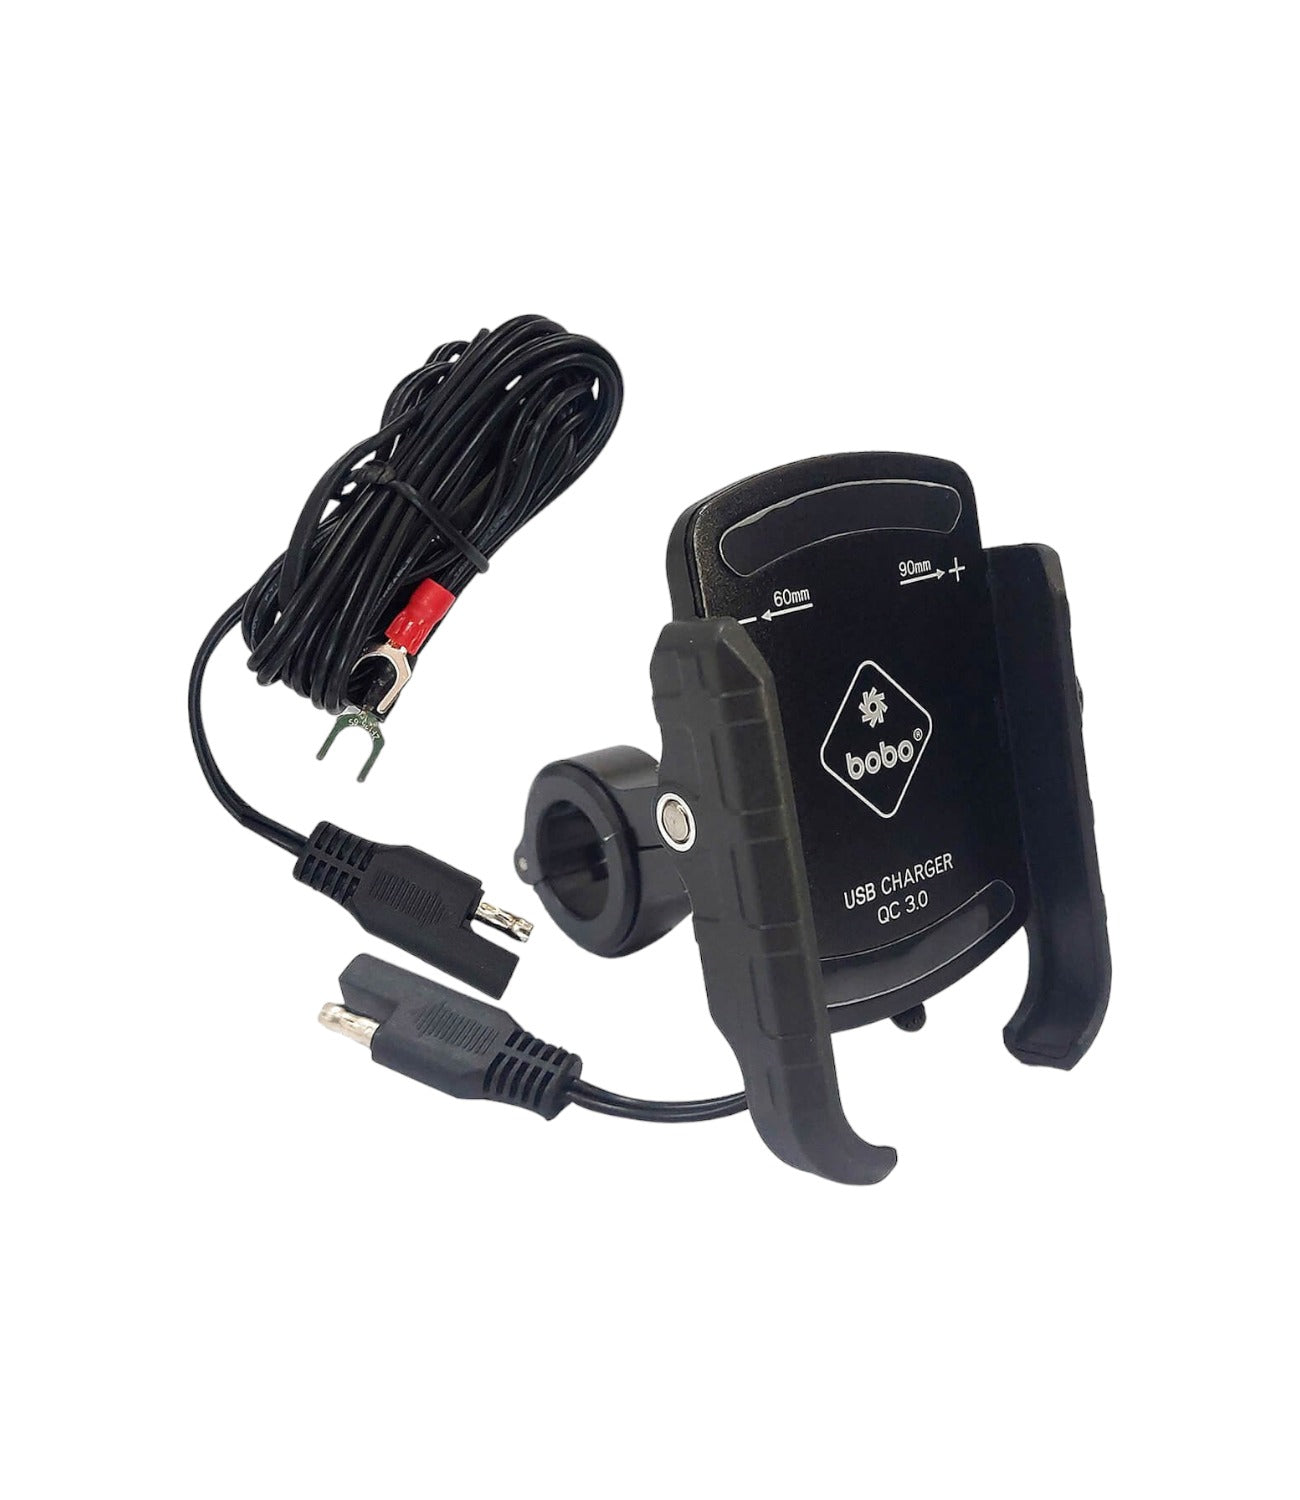 BOBO BM1 Pro Motorcycle Phone Holder (with fast USB 3.0 charger)